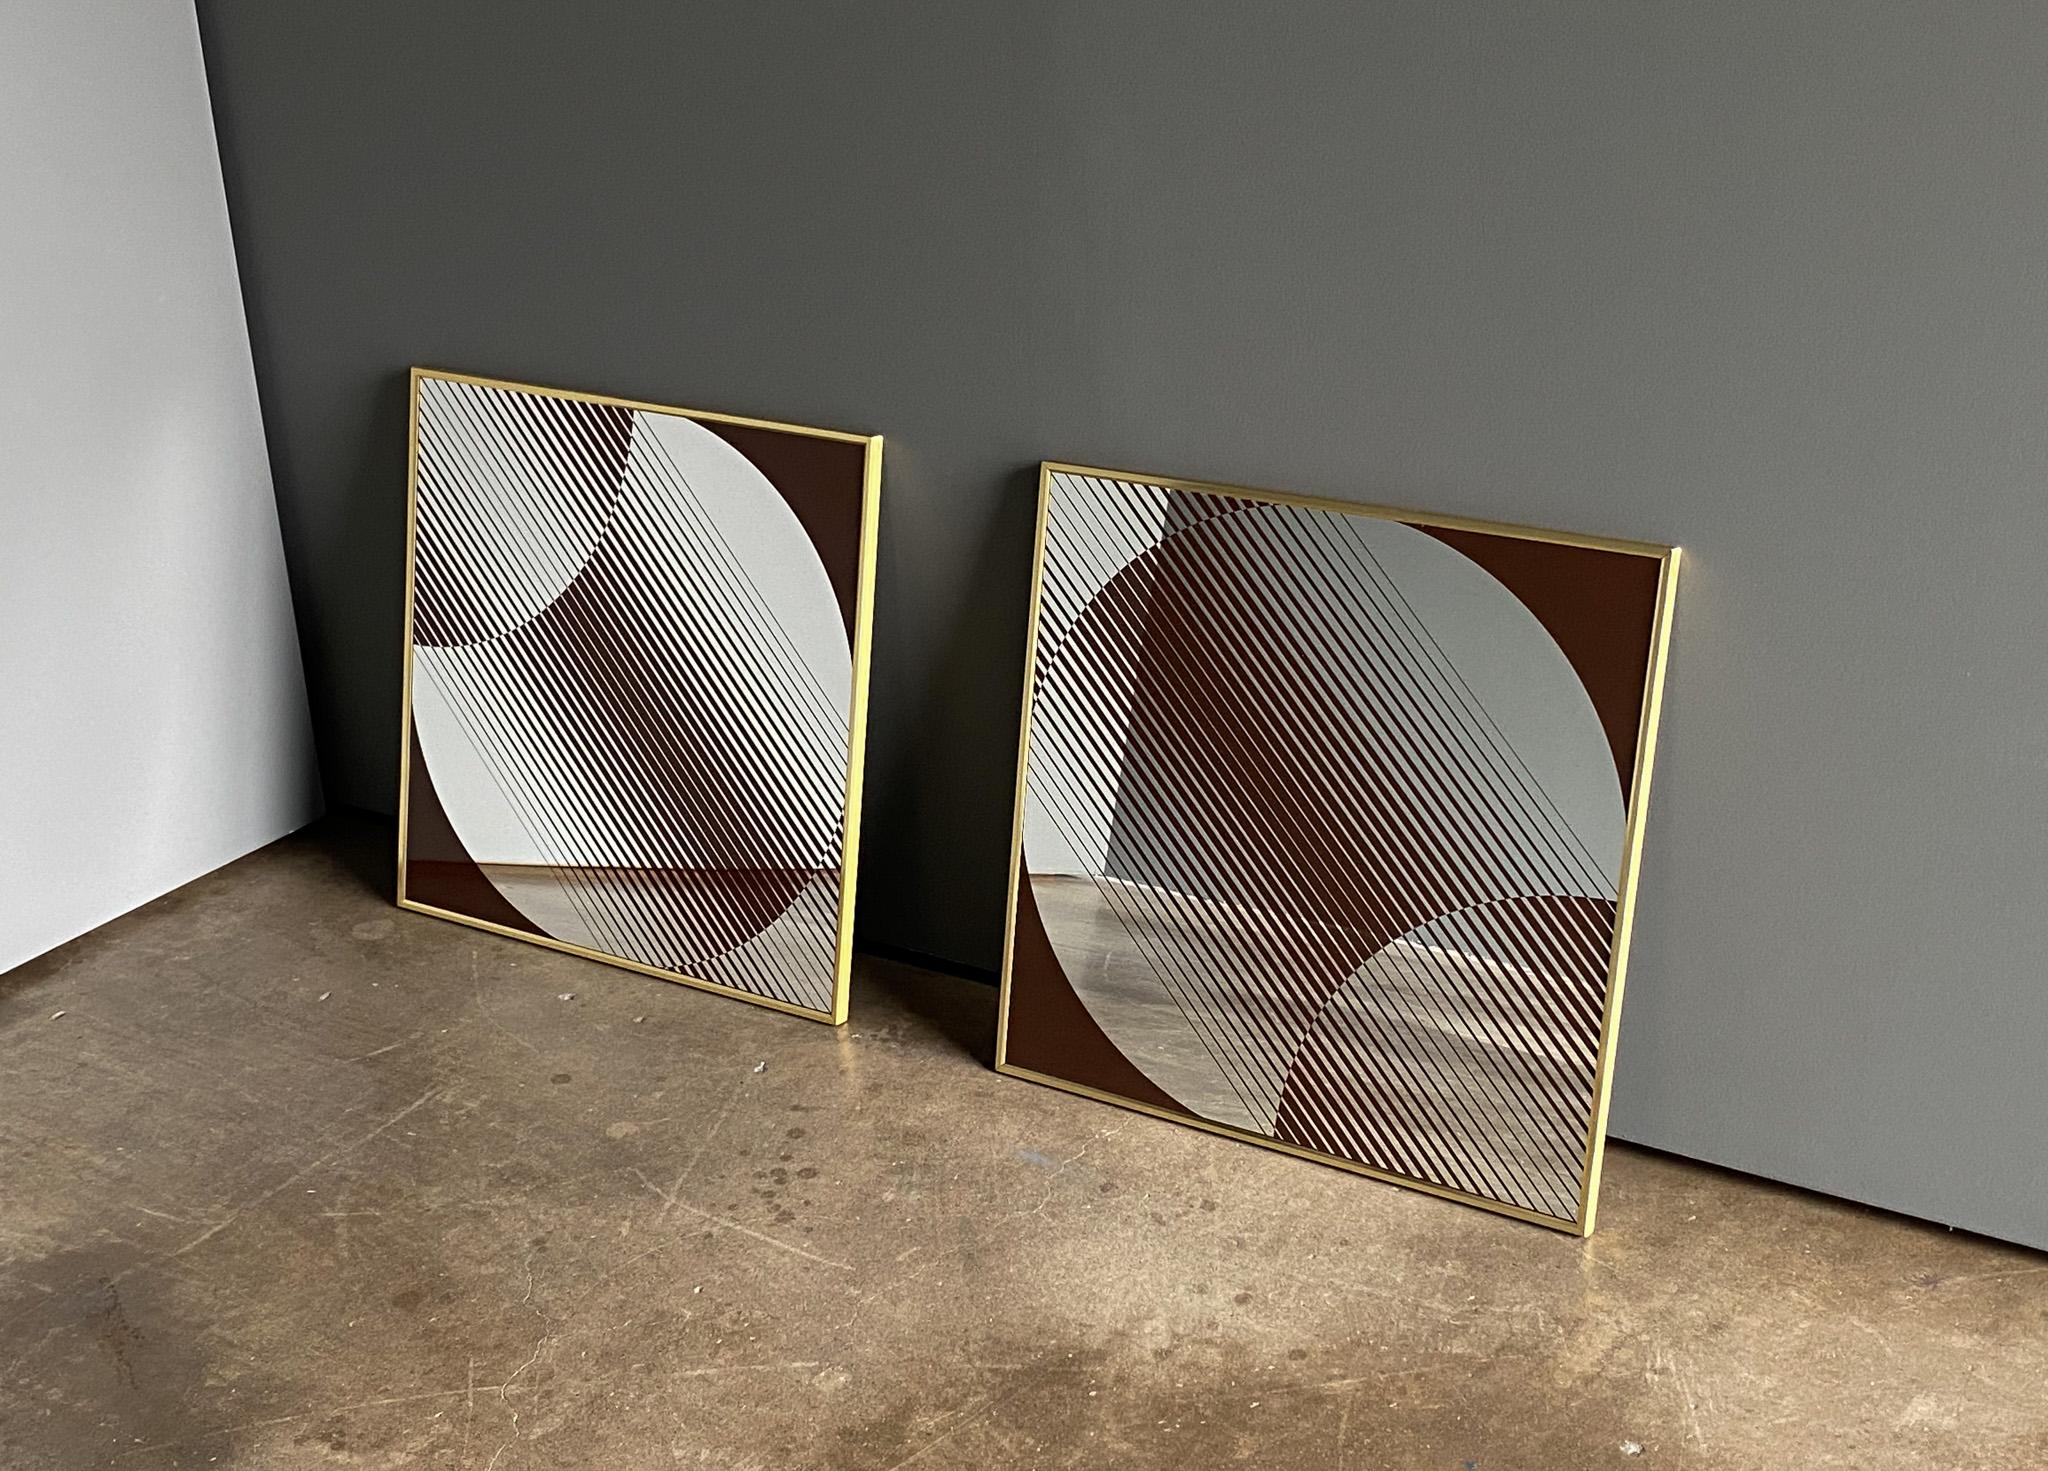 Turner Op Art Abstract Wall Mirrors, United States, 1970's  6